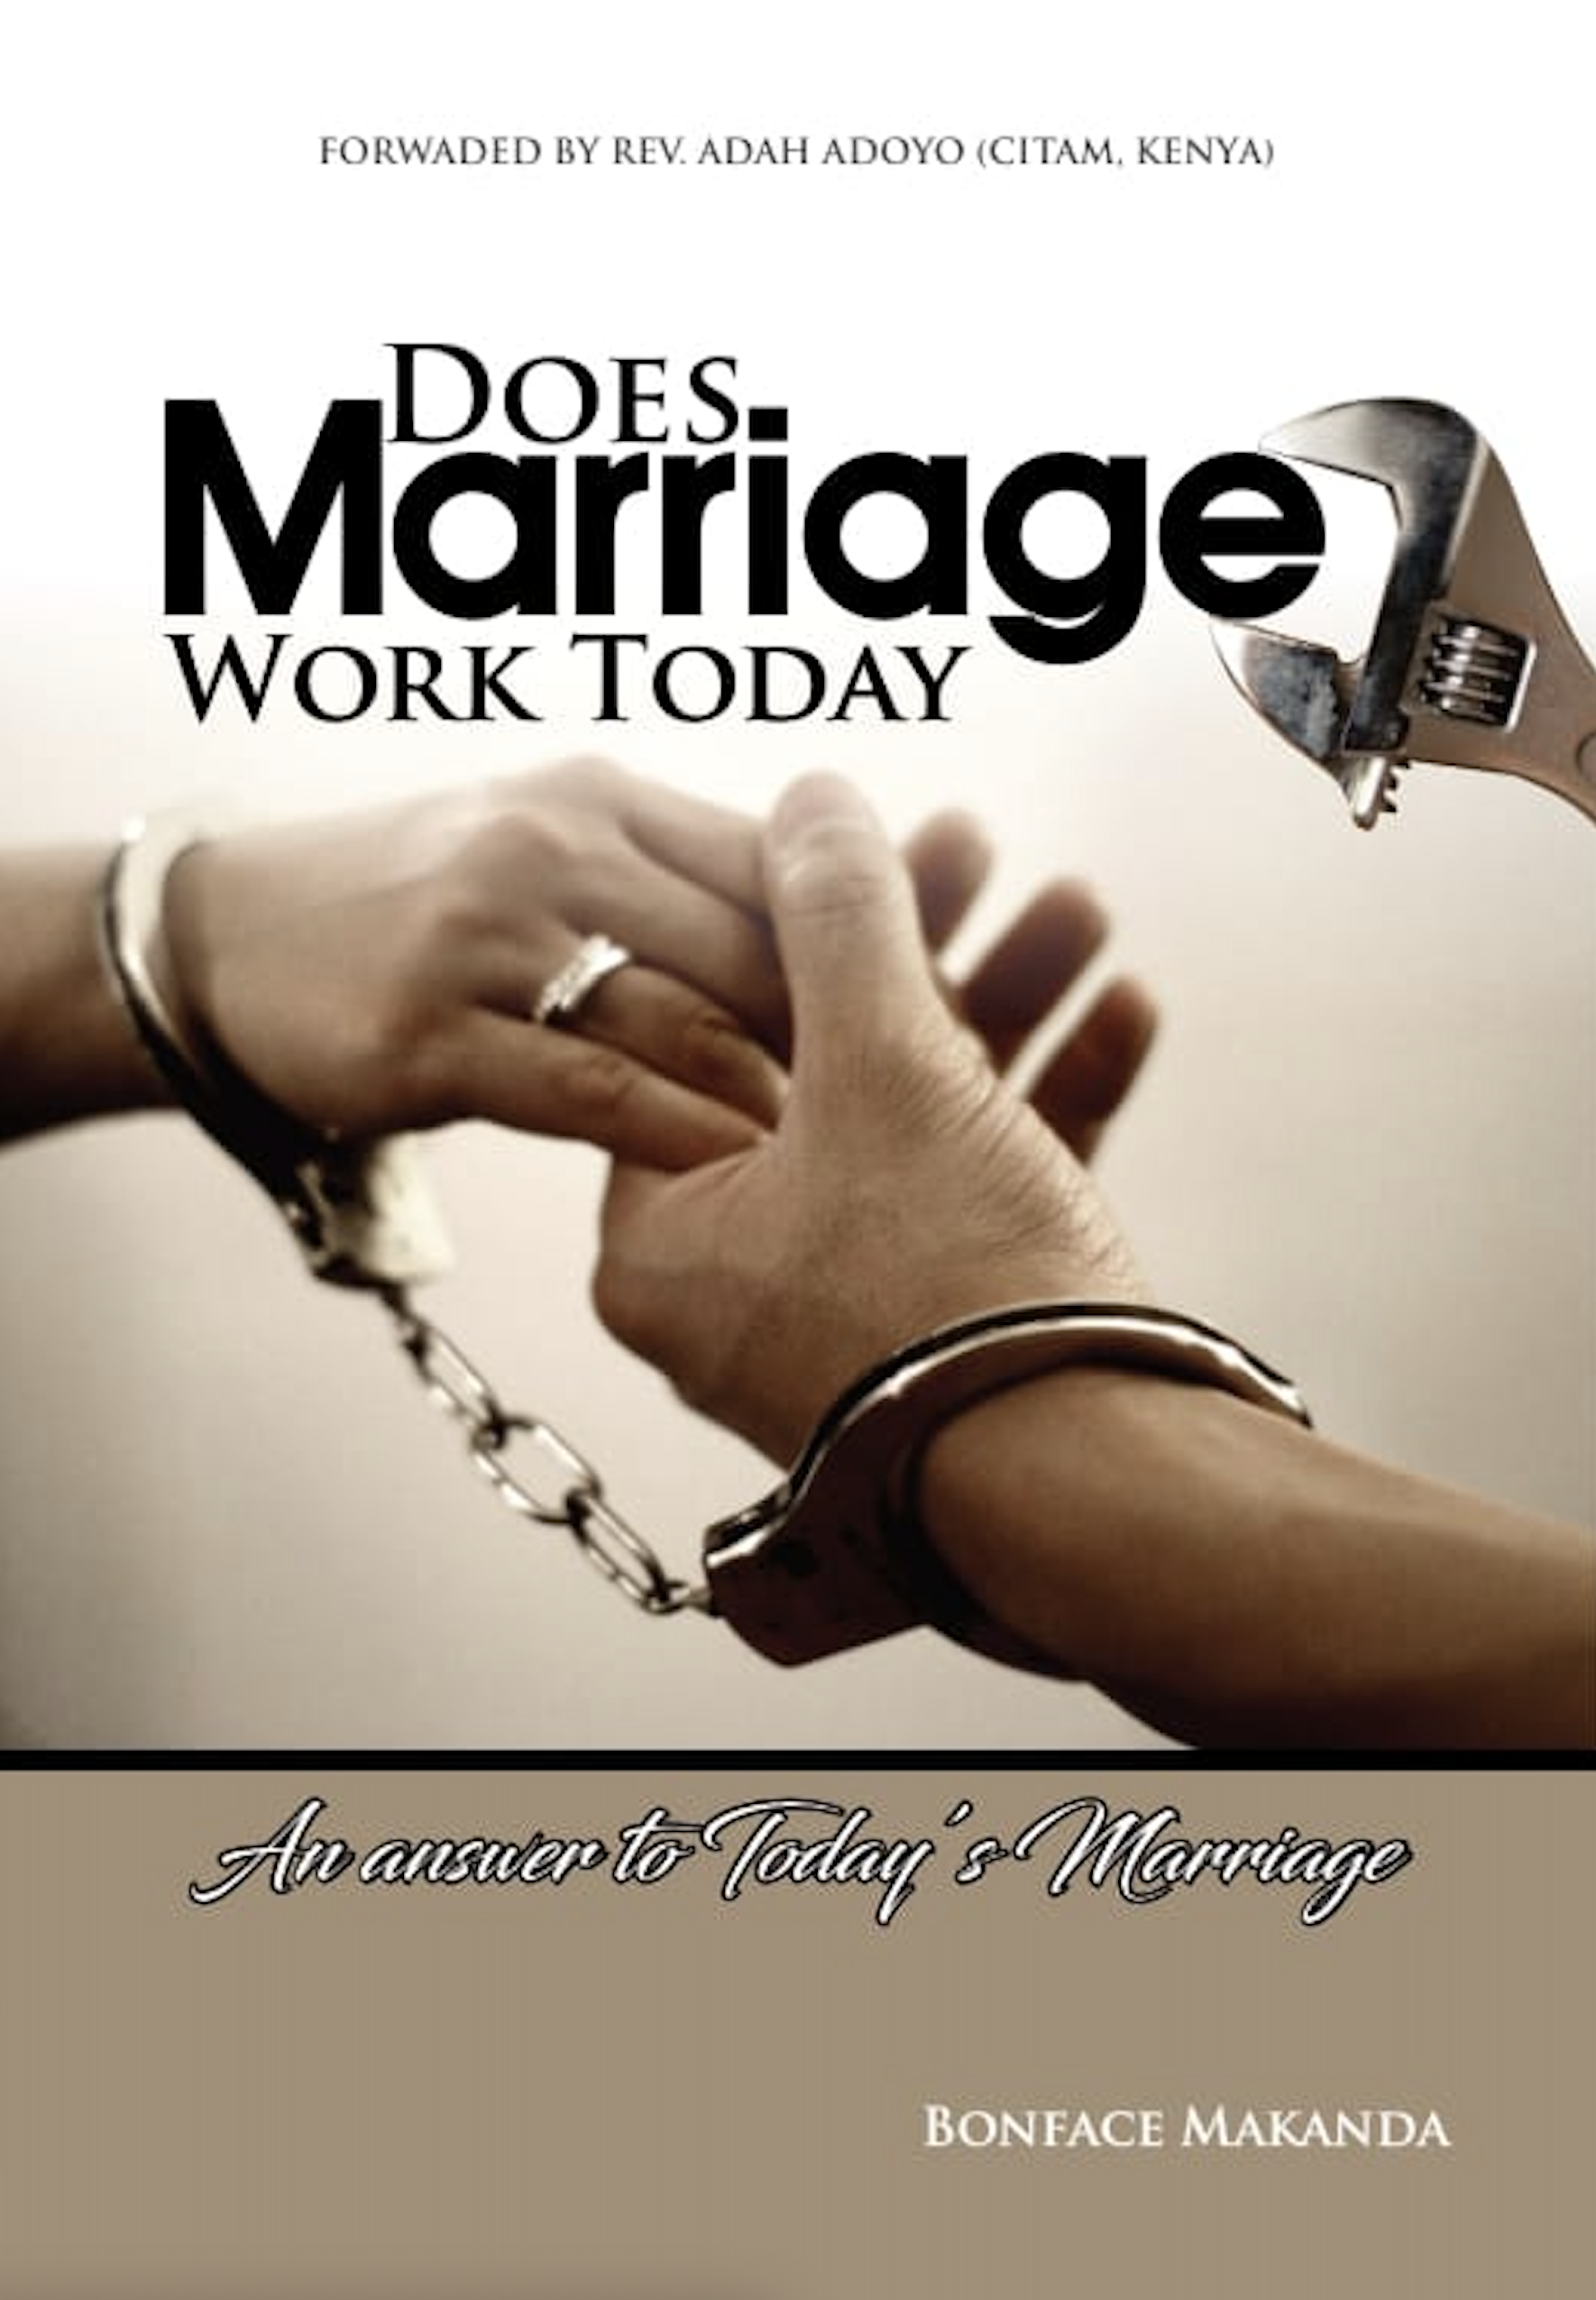 Does Marriage Work Today?